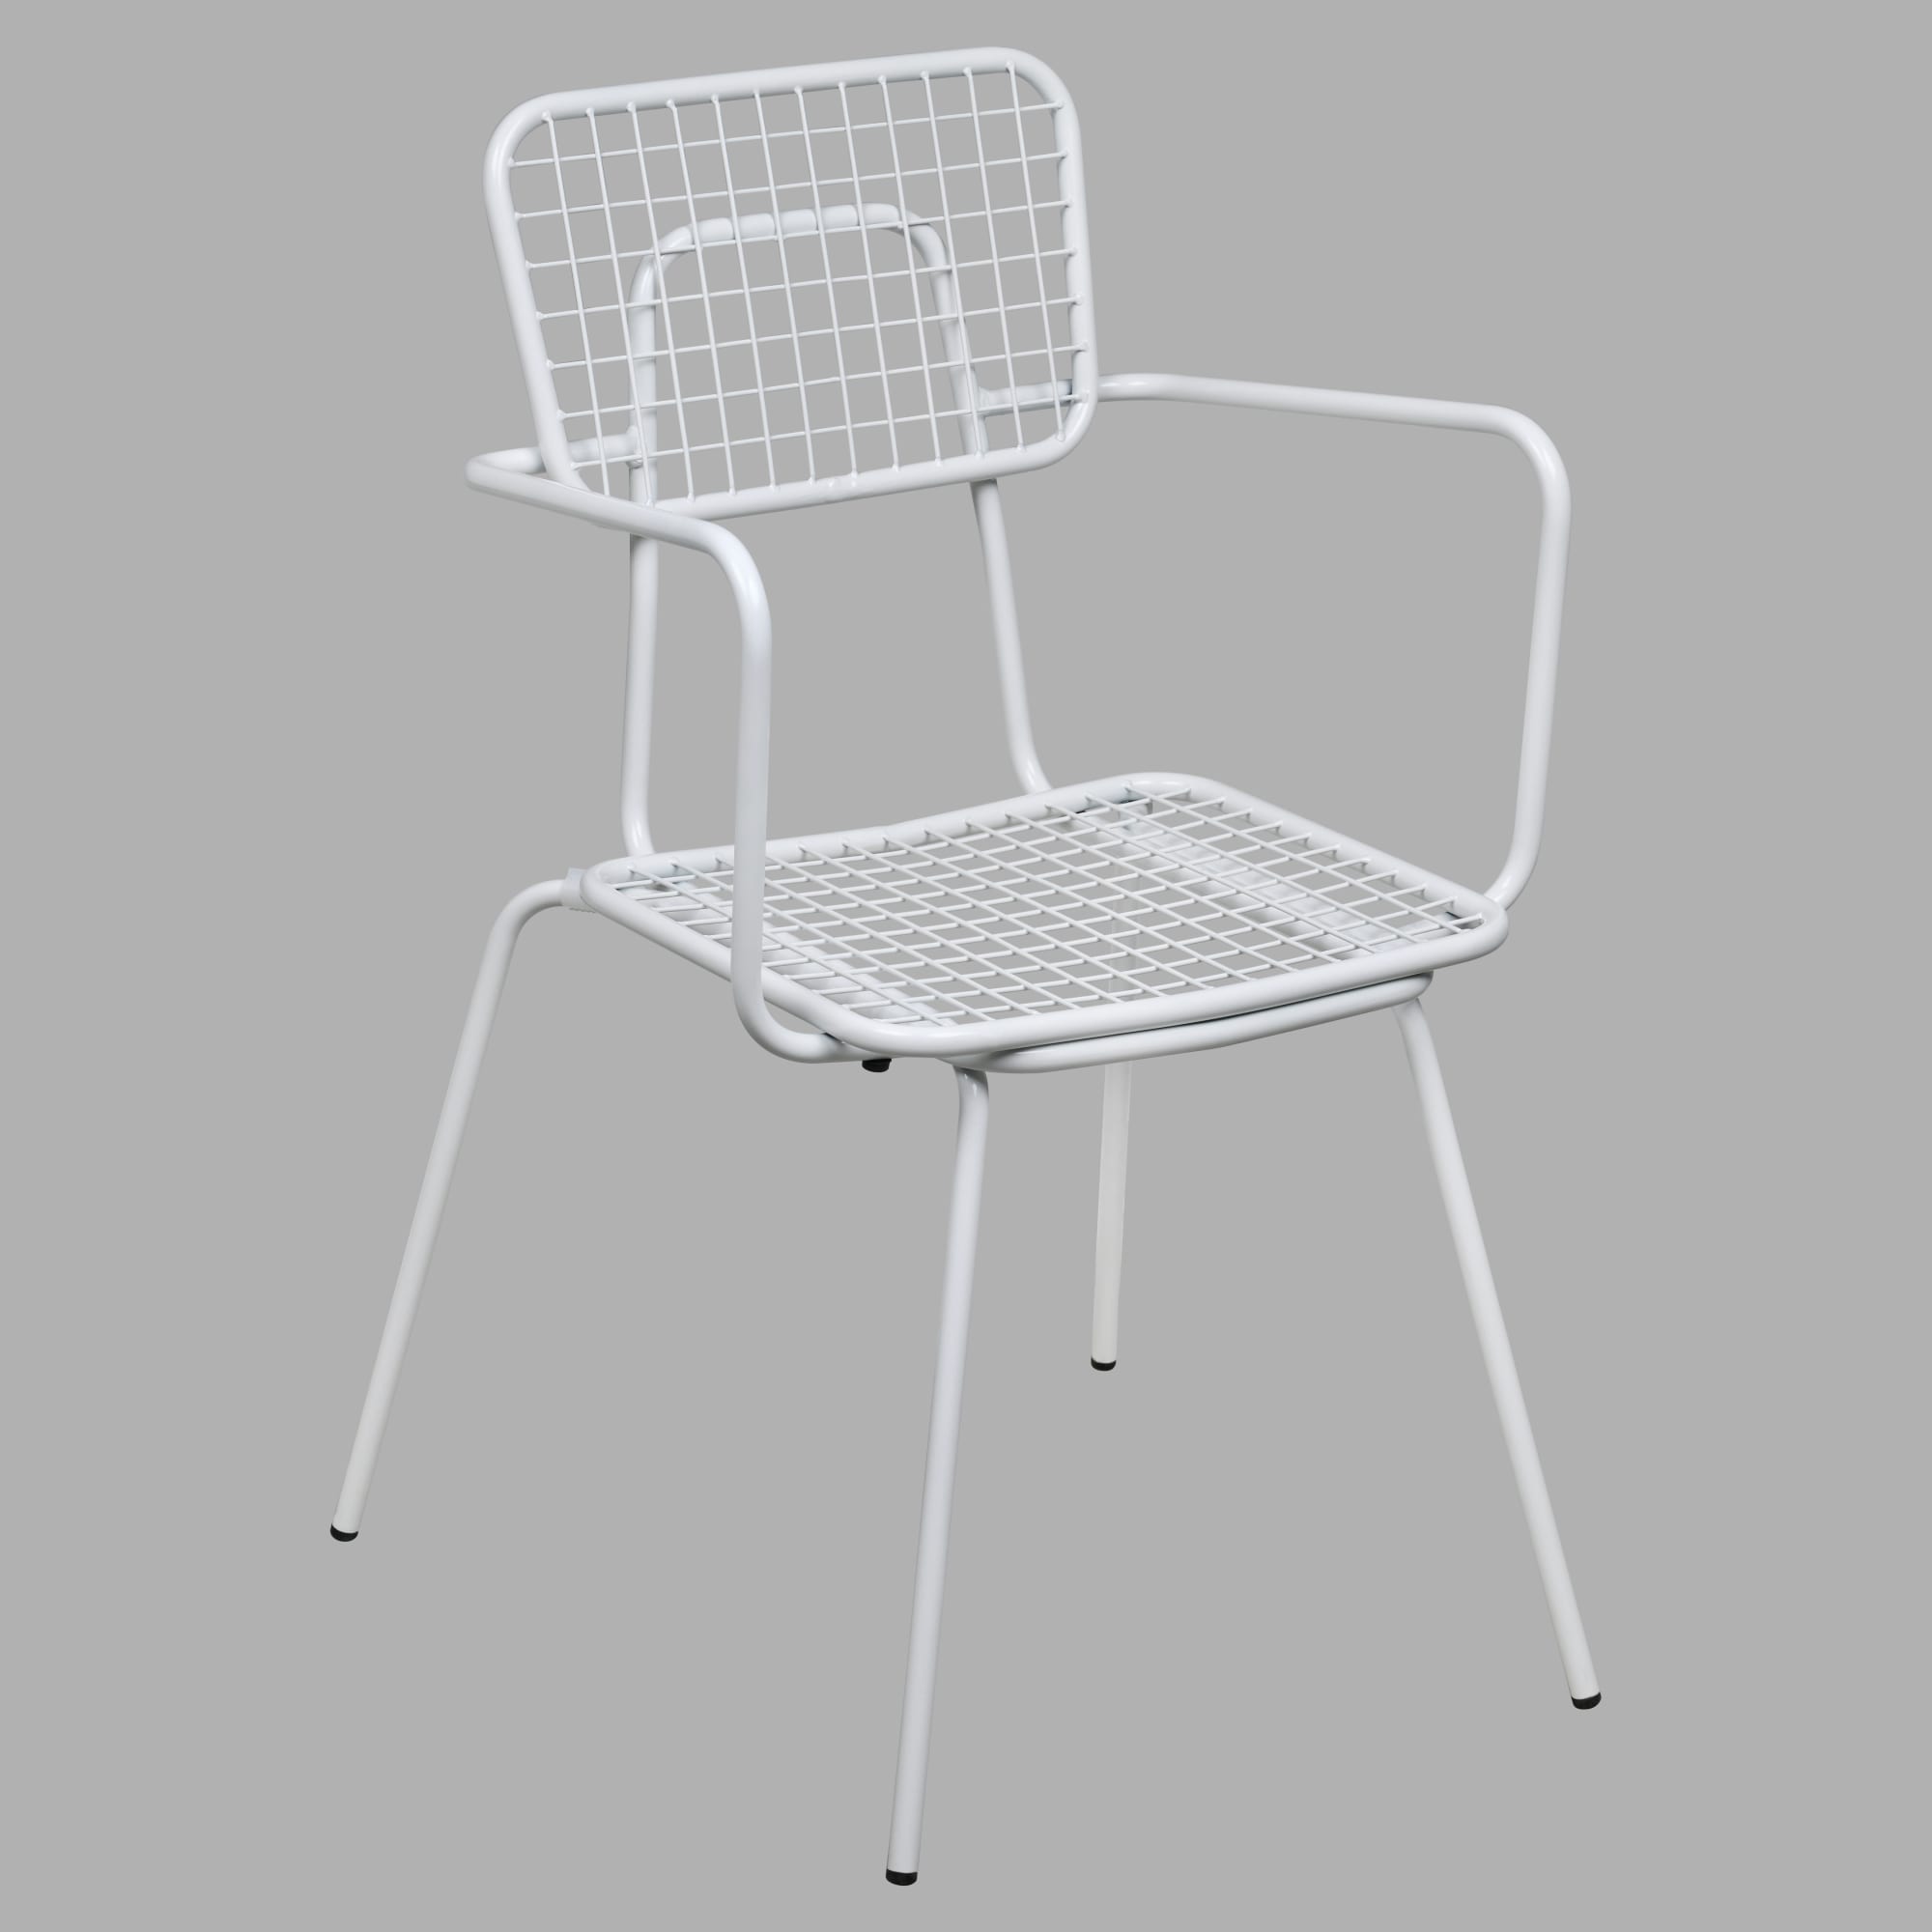 Ollie Patio Arm Chair in White Finish